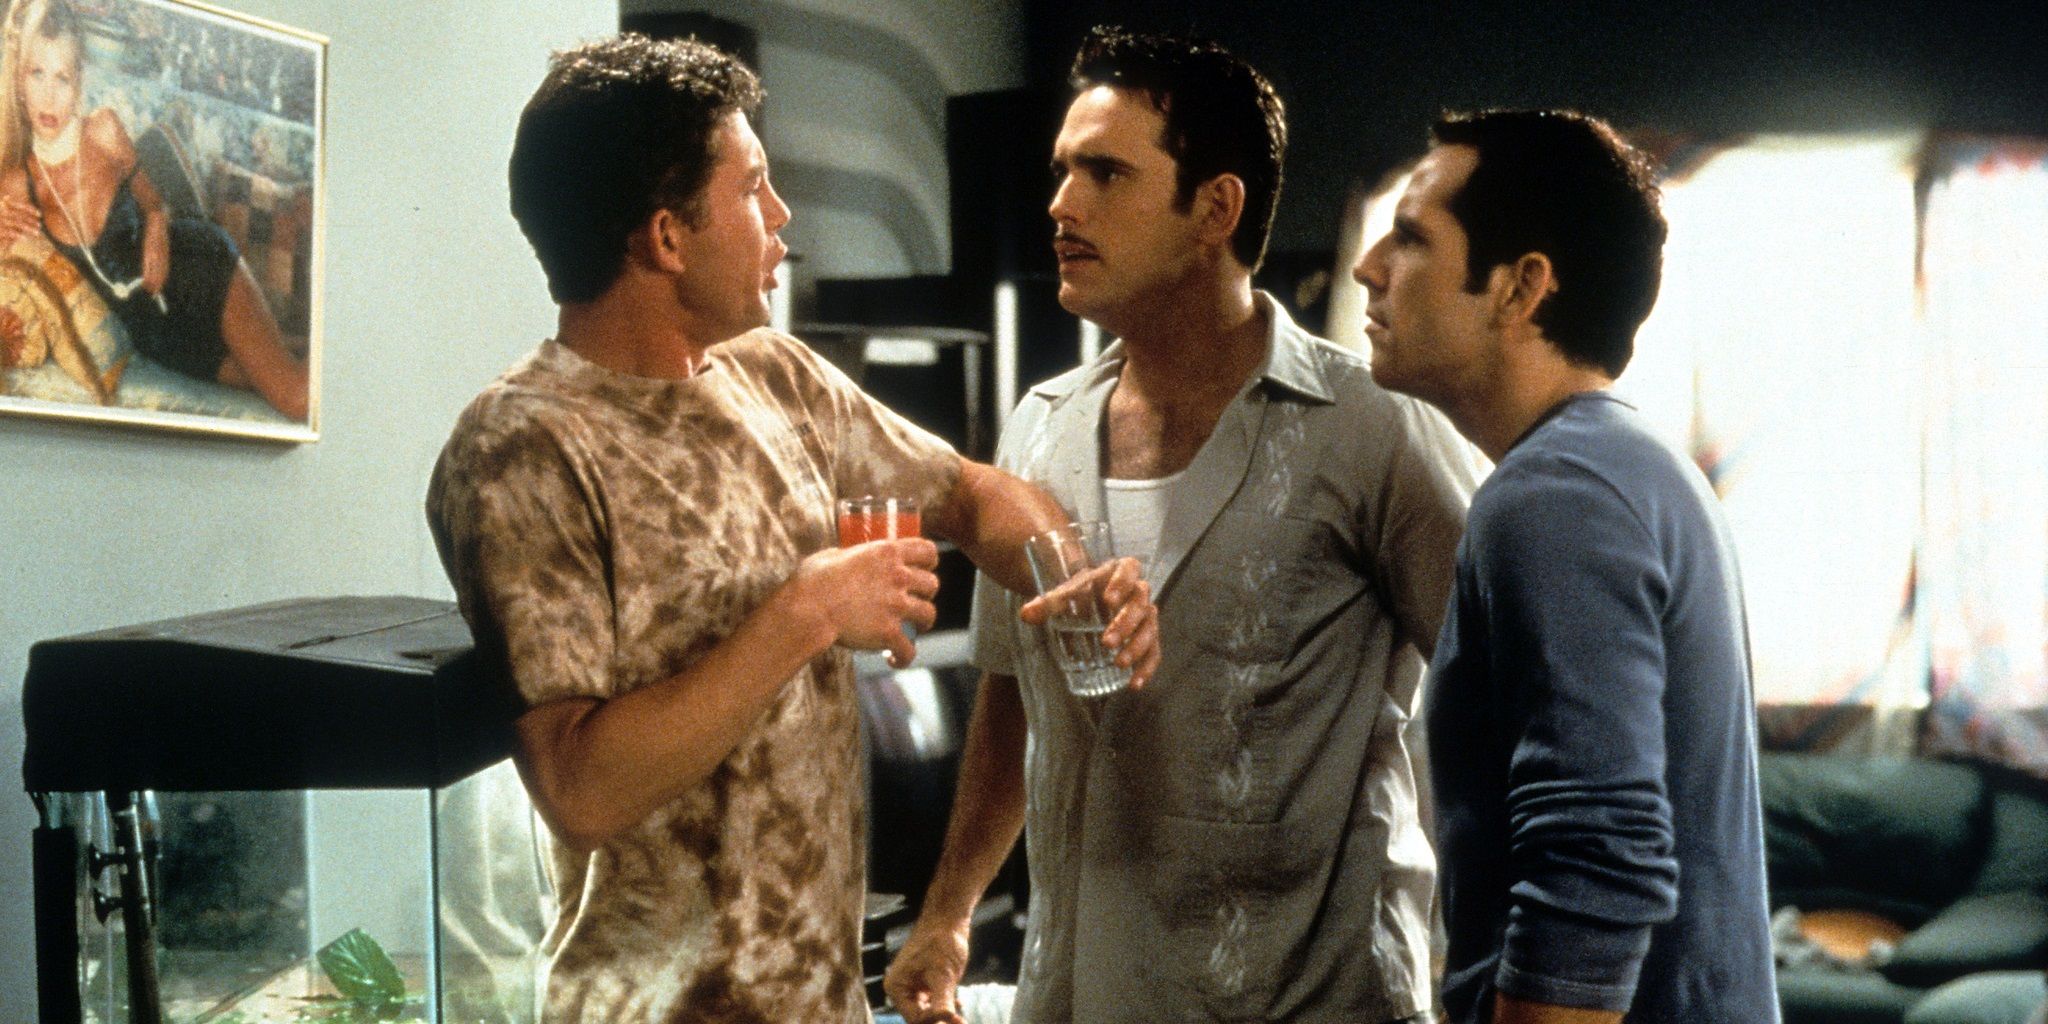 Ben Stiller, Matt Dillon, and Lee Evans in There's Something About Mary